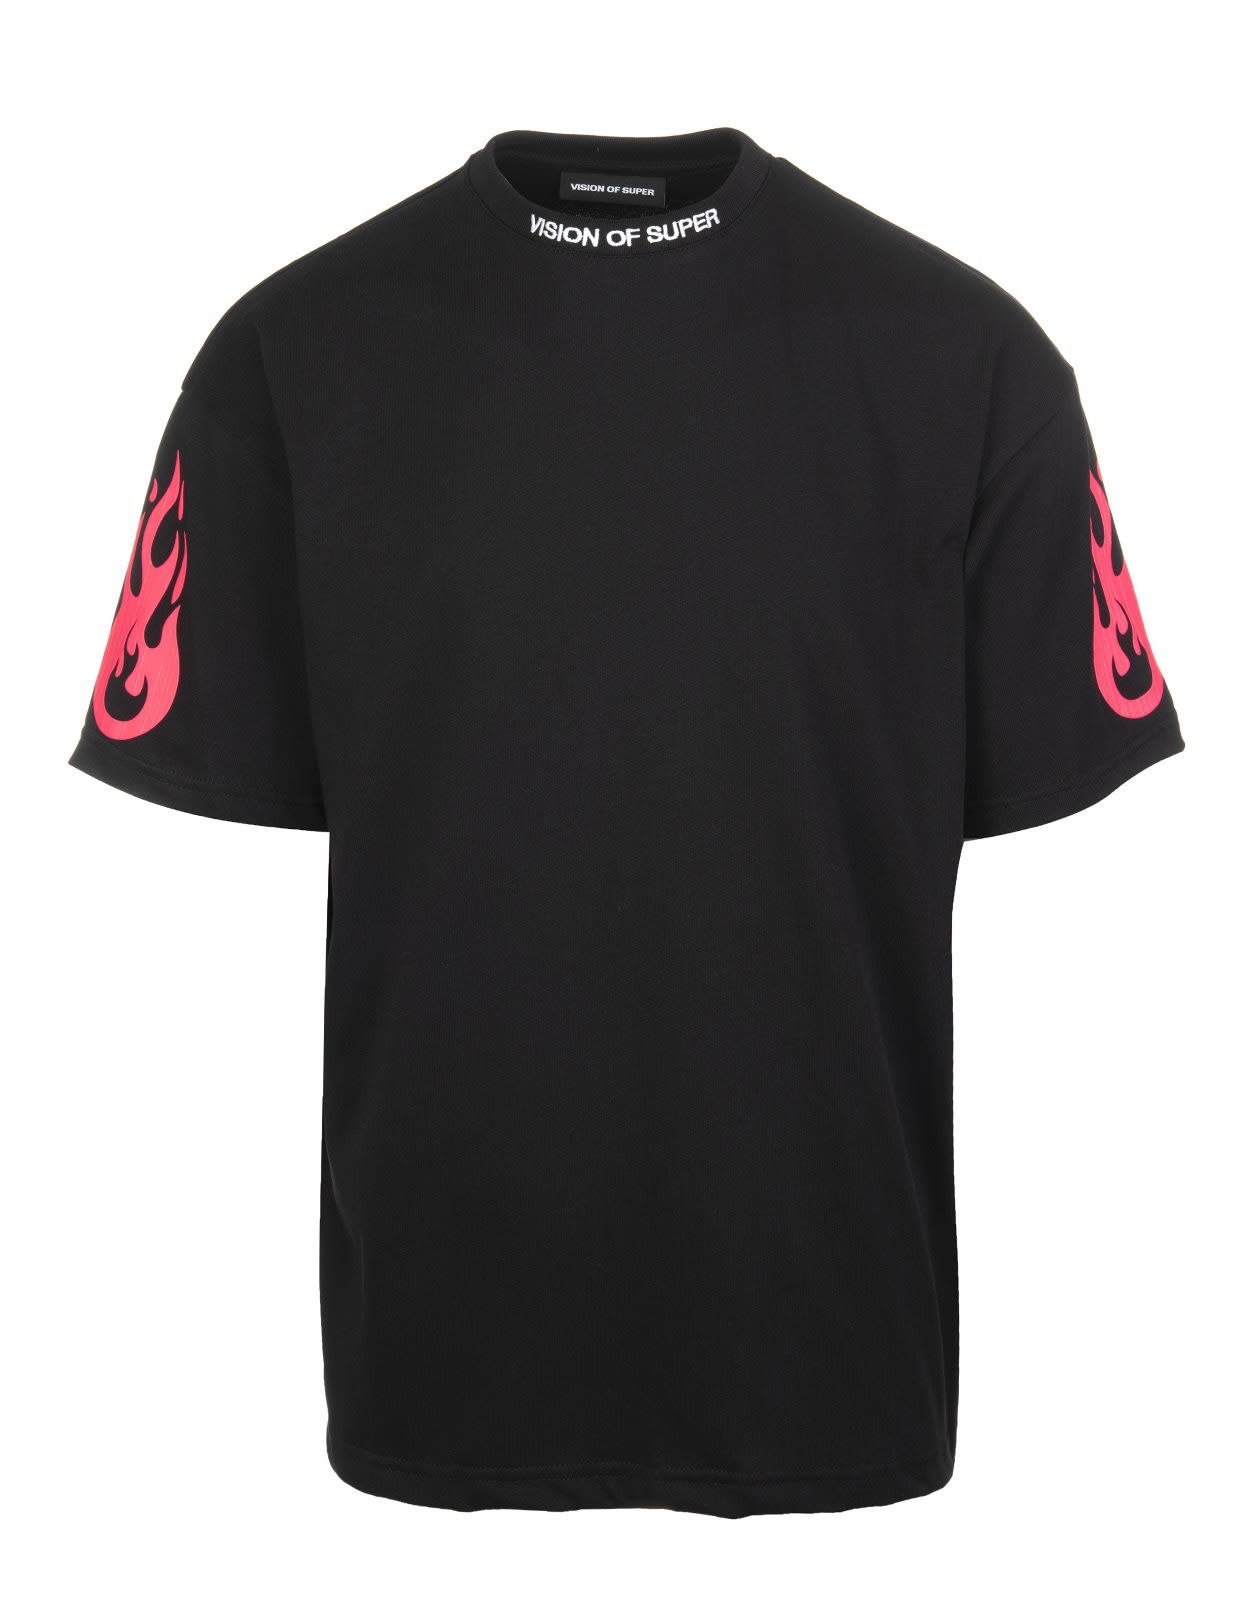 Vision of Super Man Black T-shirt With Fluo Pink Flame